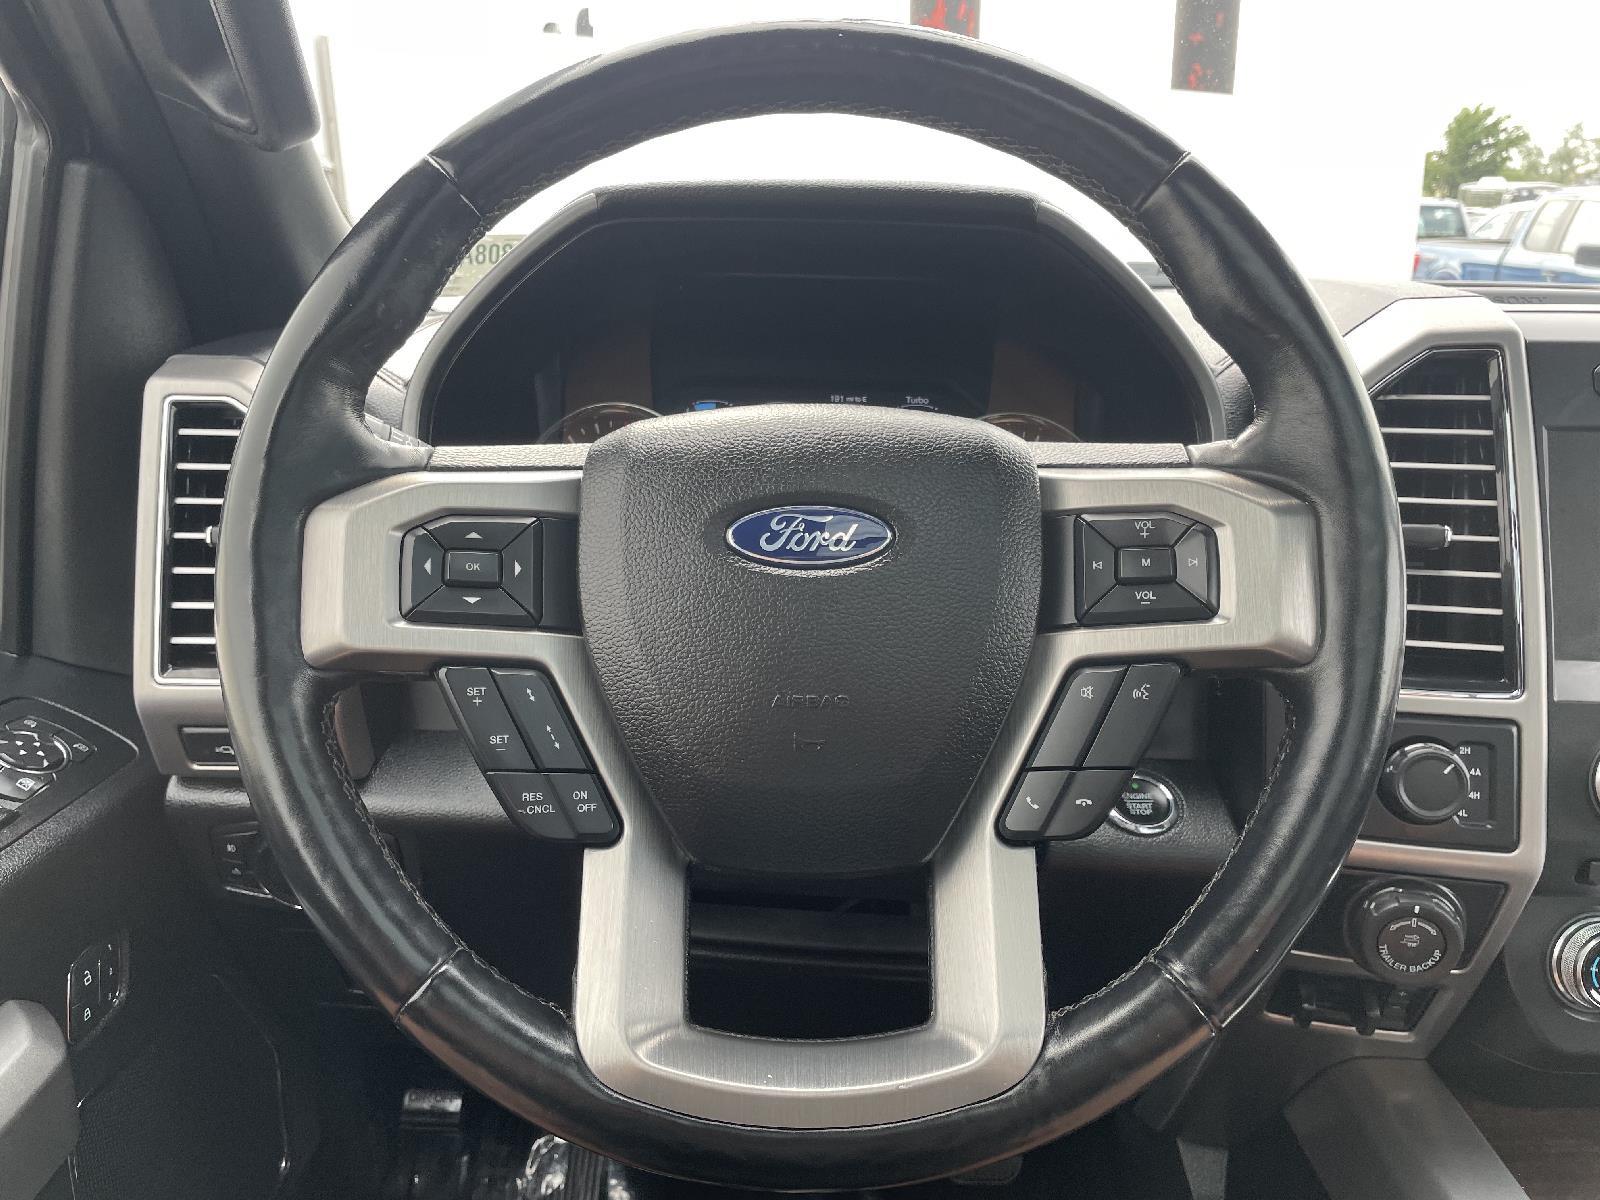 Used 2017 Ford F-150 Platinum Crew Cab Truck for sale in Lincoln NE